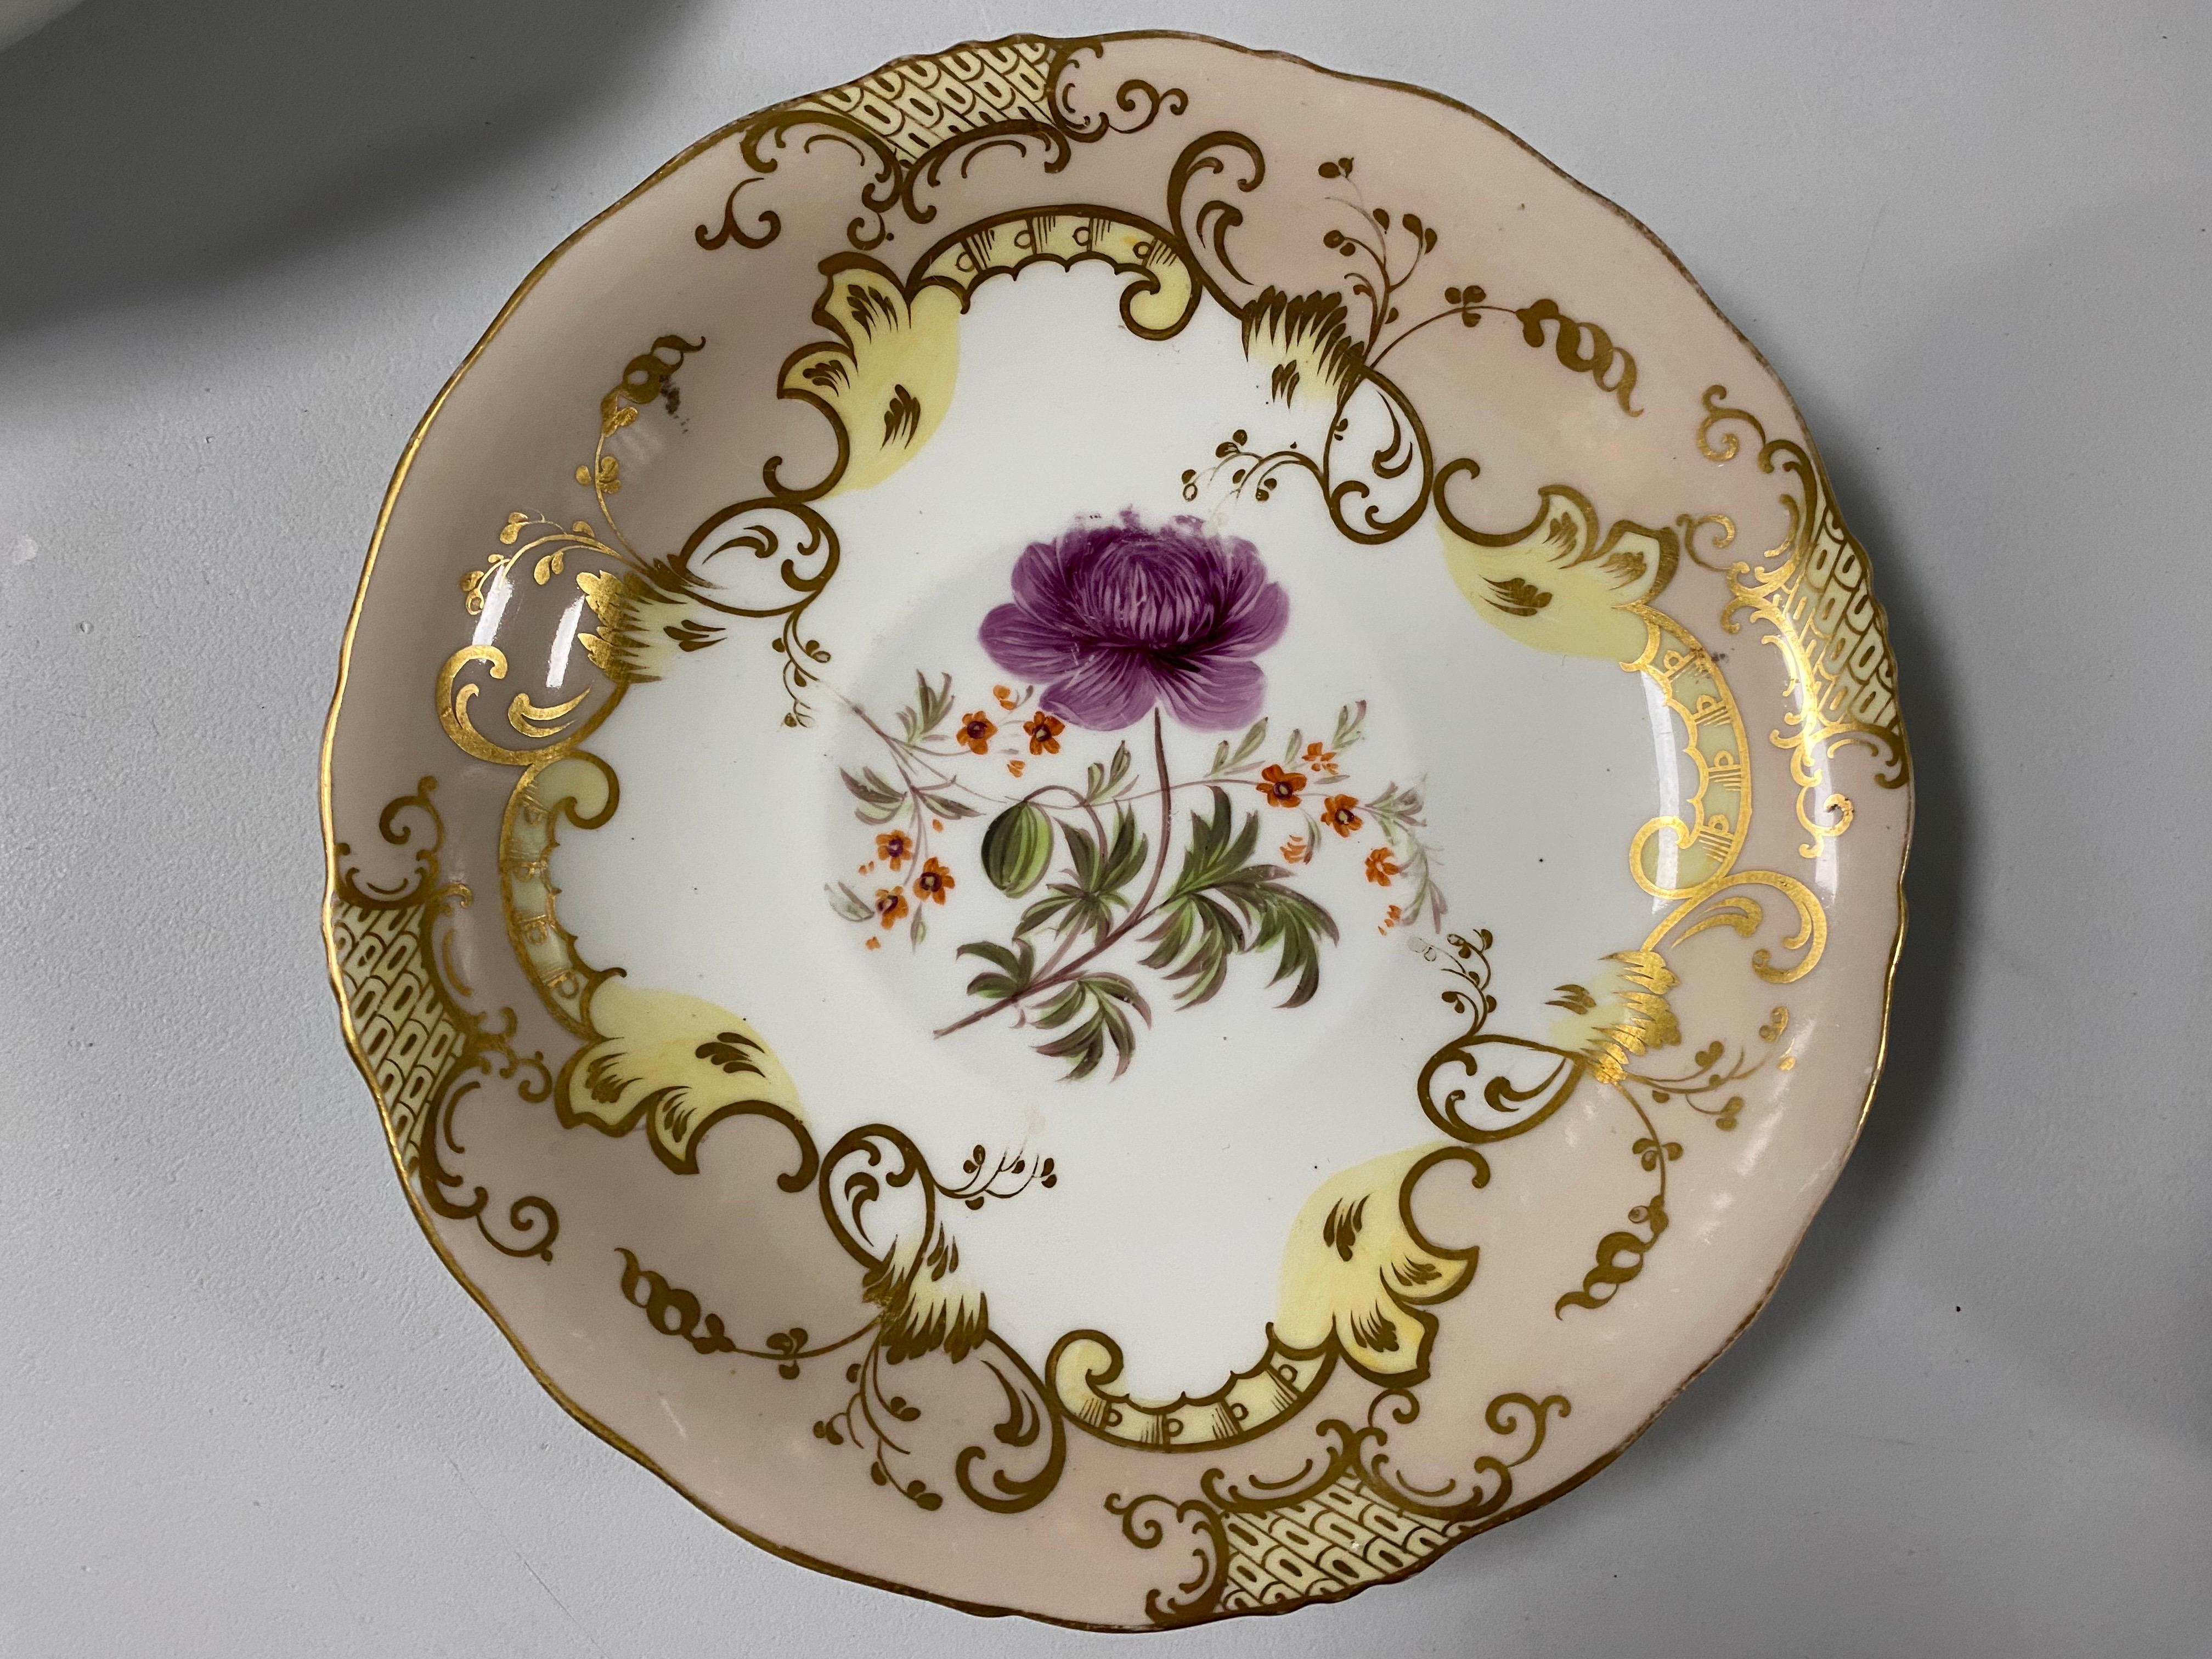 Pair of Coalport Porcelain Saucers, Beige & Flowers, By Joseph Birbeck, c. 1847
Lovely gold painted on beige ground with a pink tulip on one and a purple flower on the other. Marked 8854 underside on both. 
From a Private Collection in